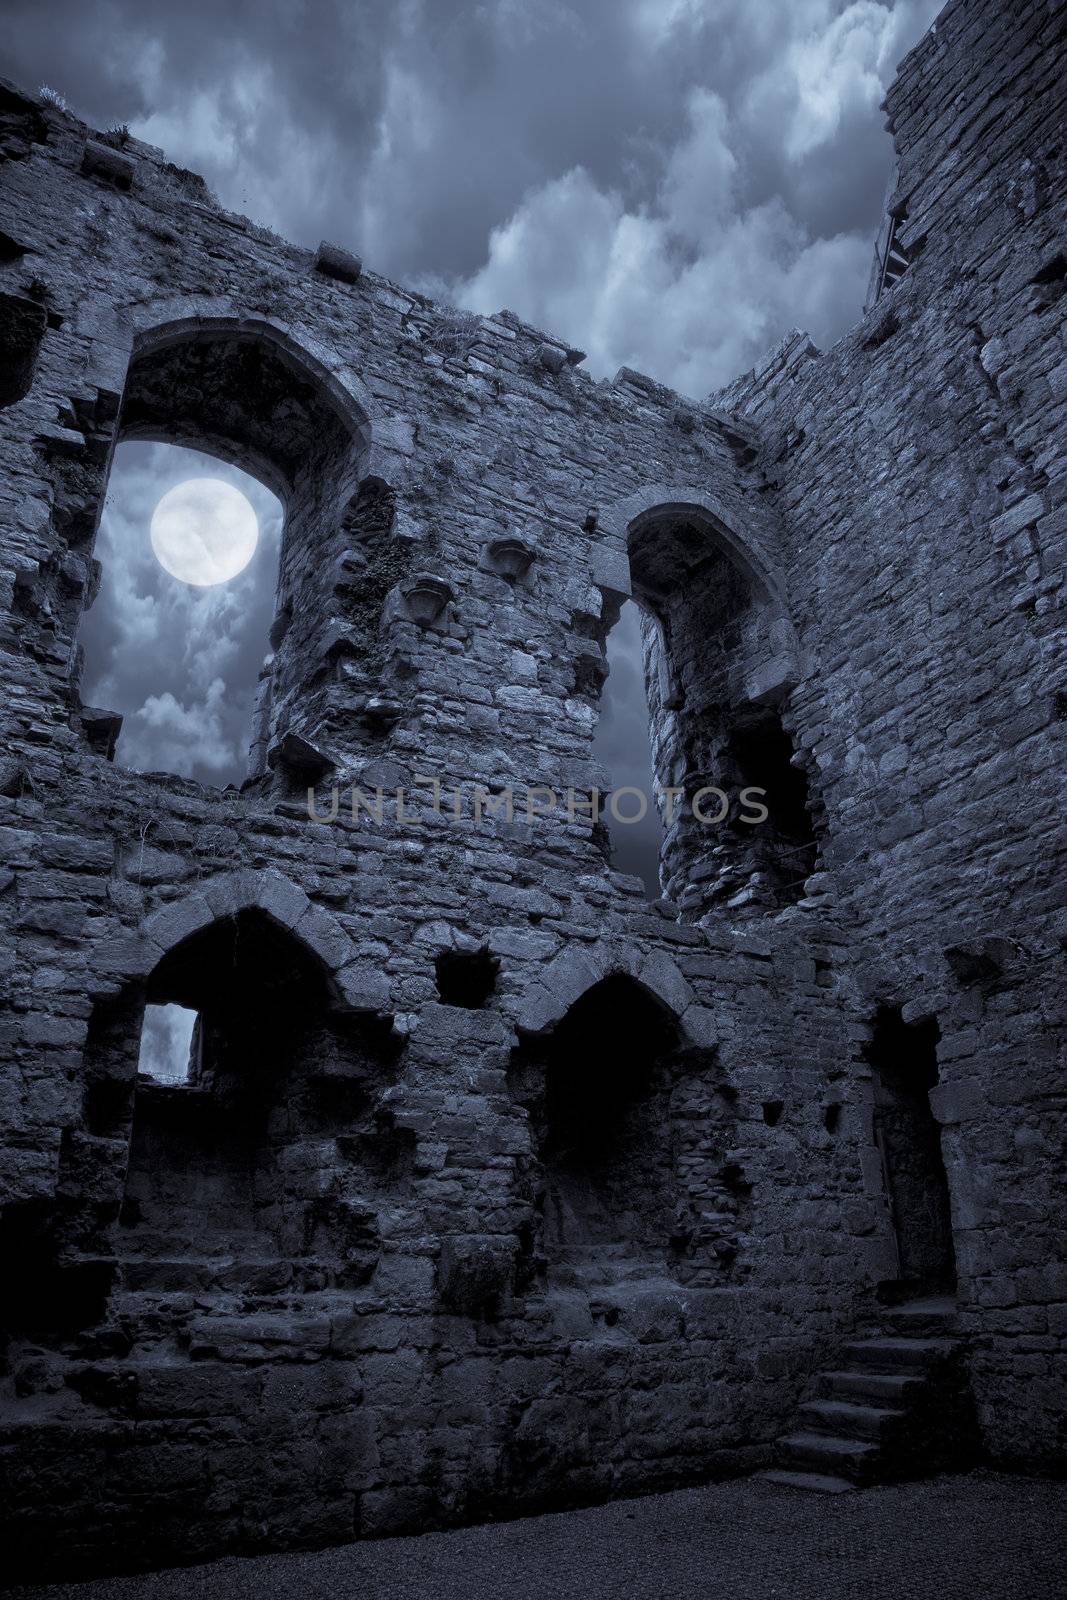 A very spooky castle in the moonlight, the moon is shining through a window.